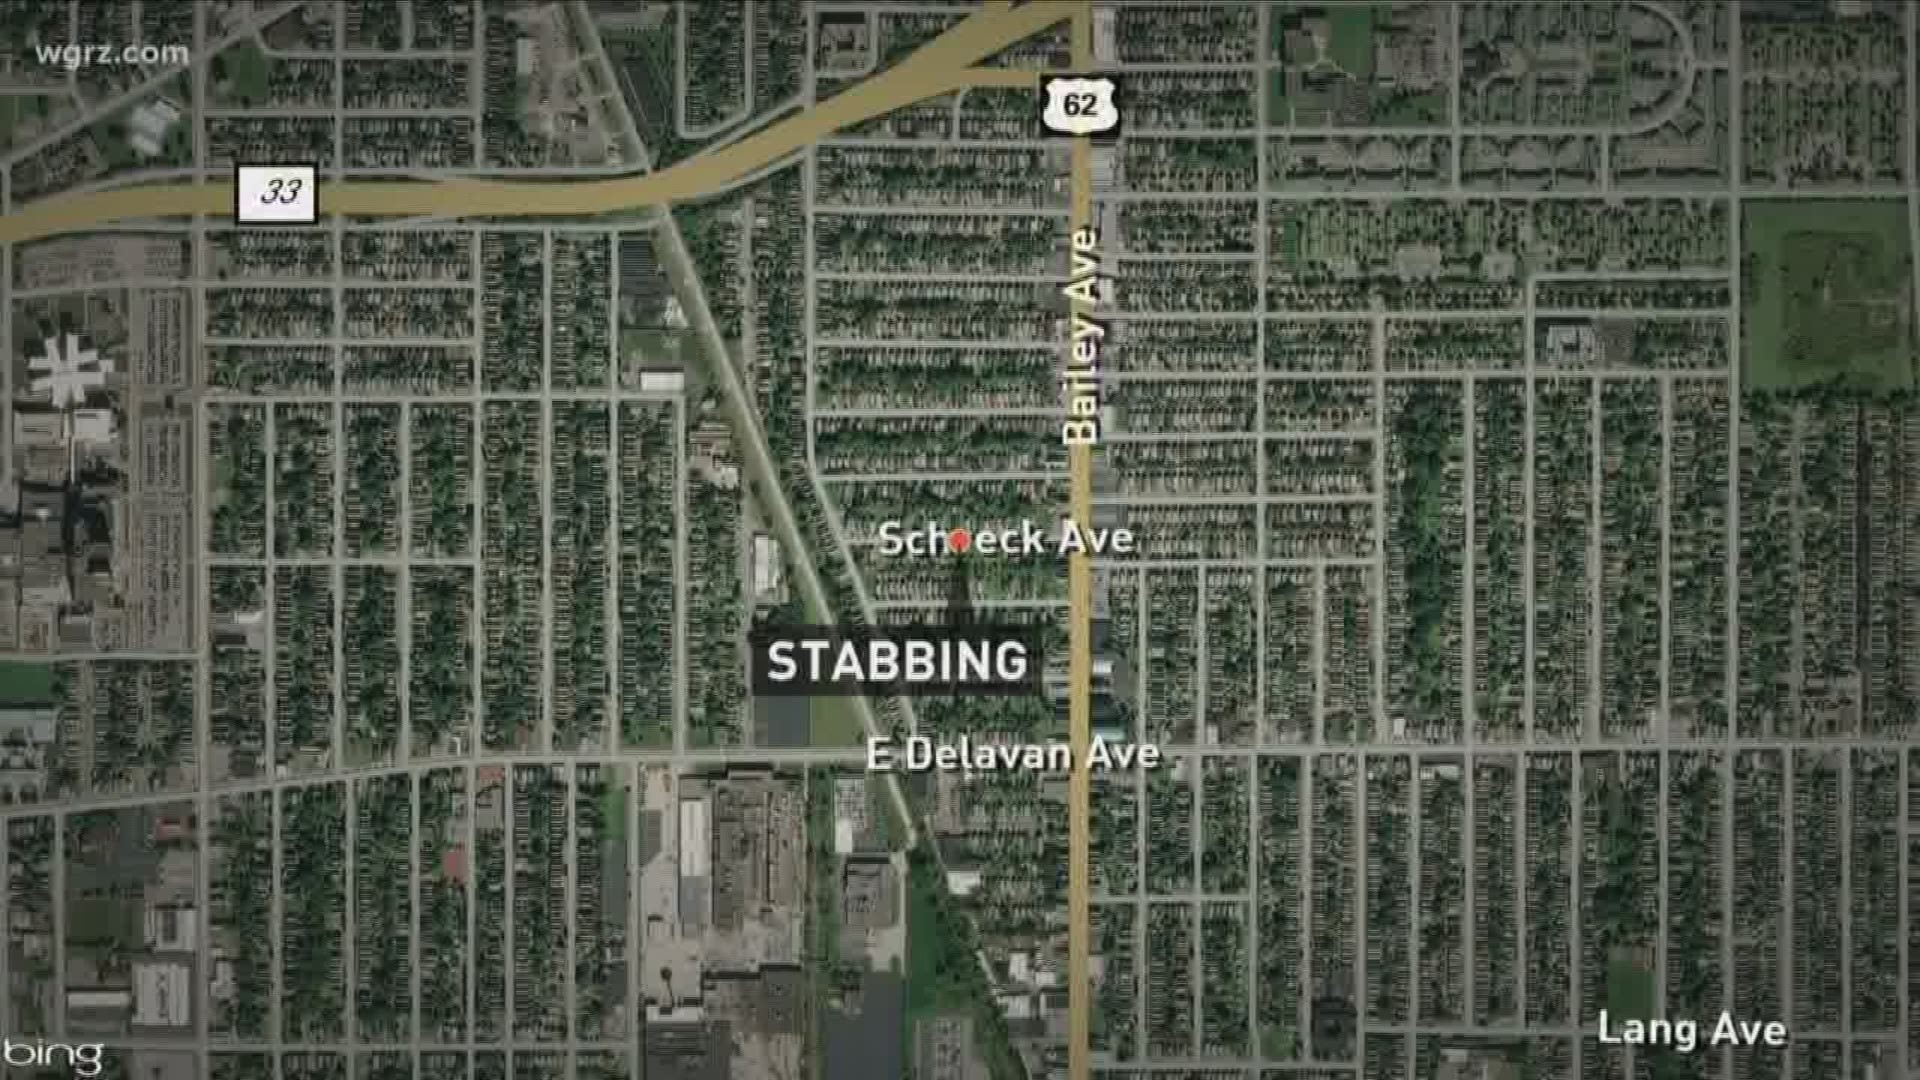 Arrest made in connection with stabbing.